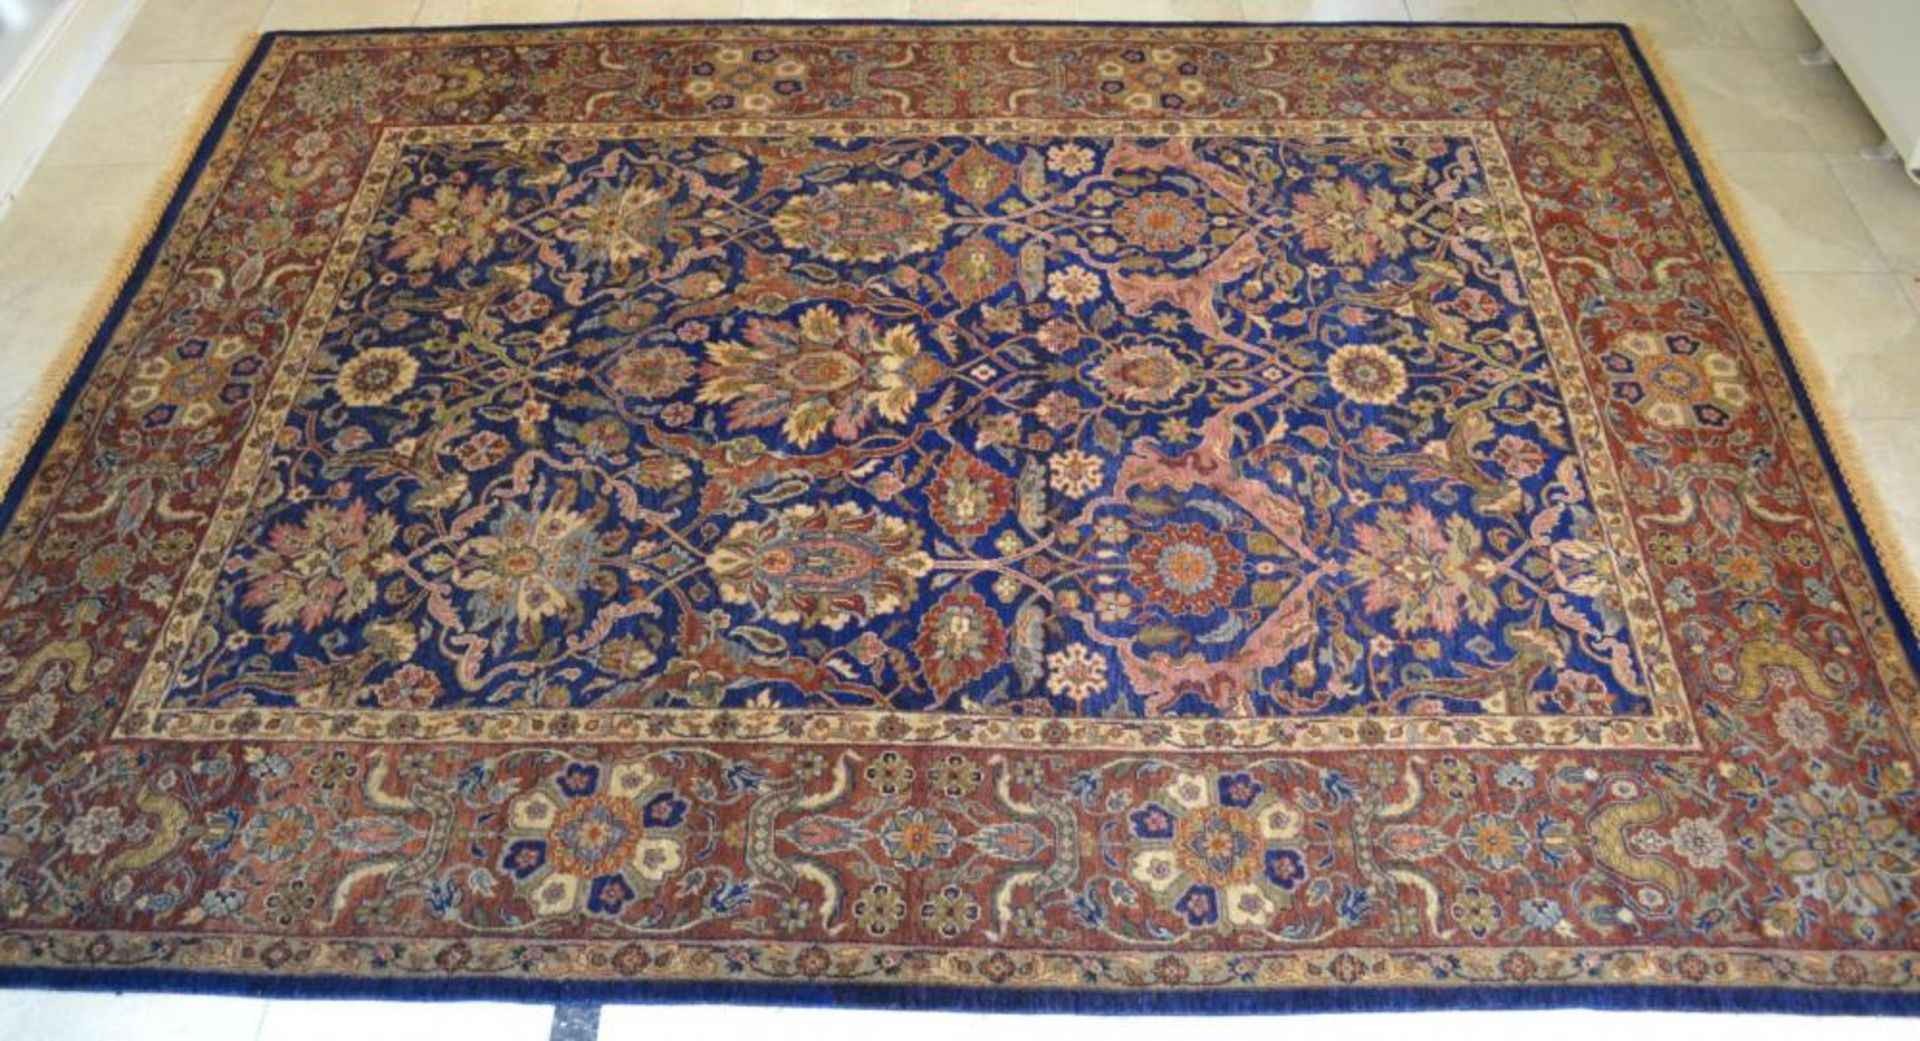 1 x Fine Indian Vegetable Dyed Handmade Carpet in Navy and Rust - All Wool With Cotton Foundation - - Image 14 of 22